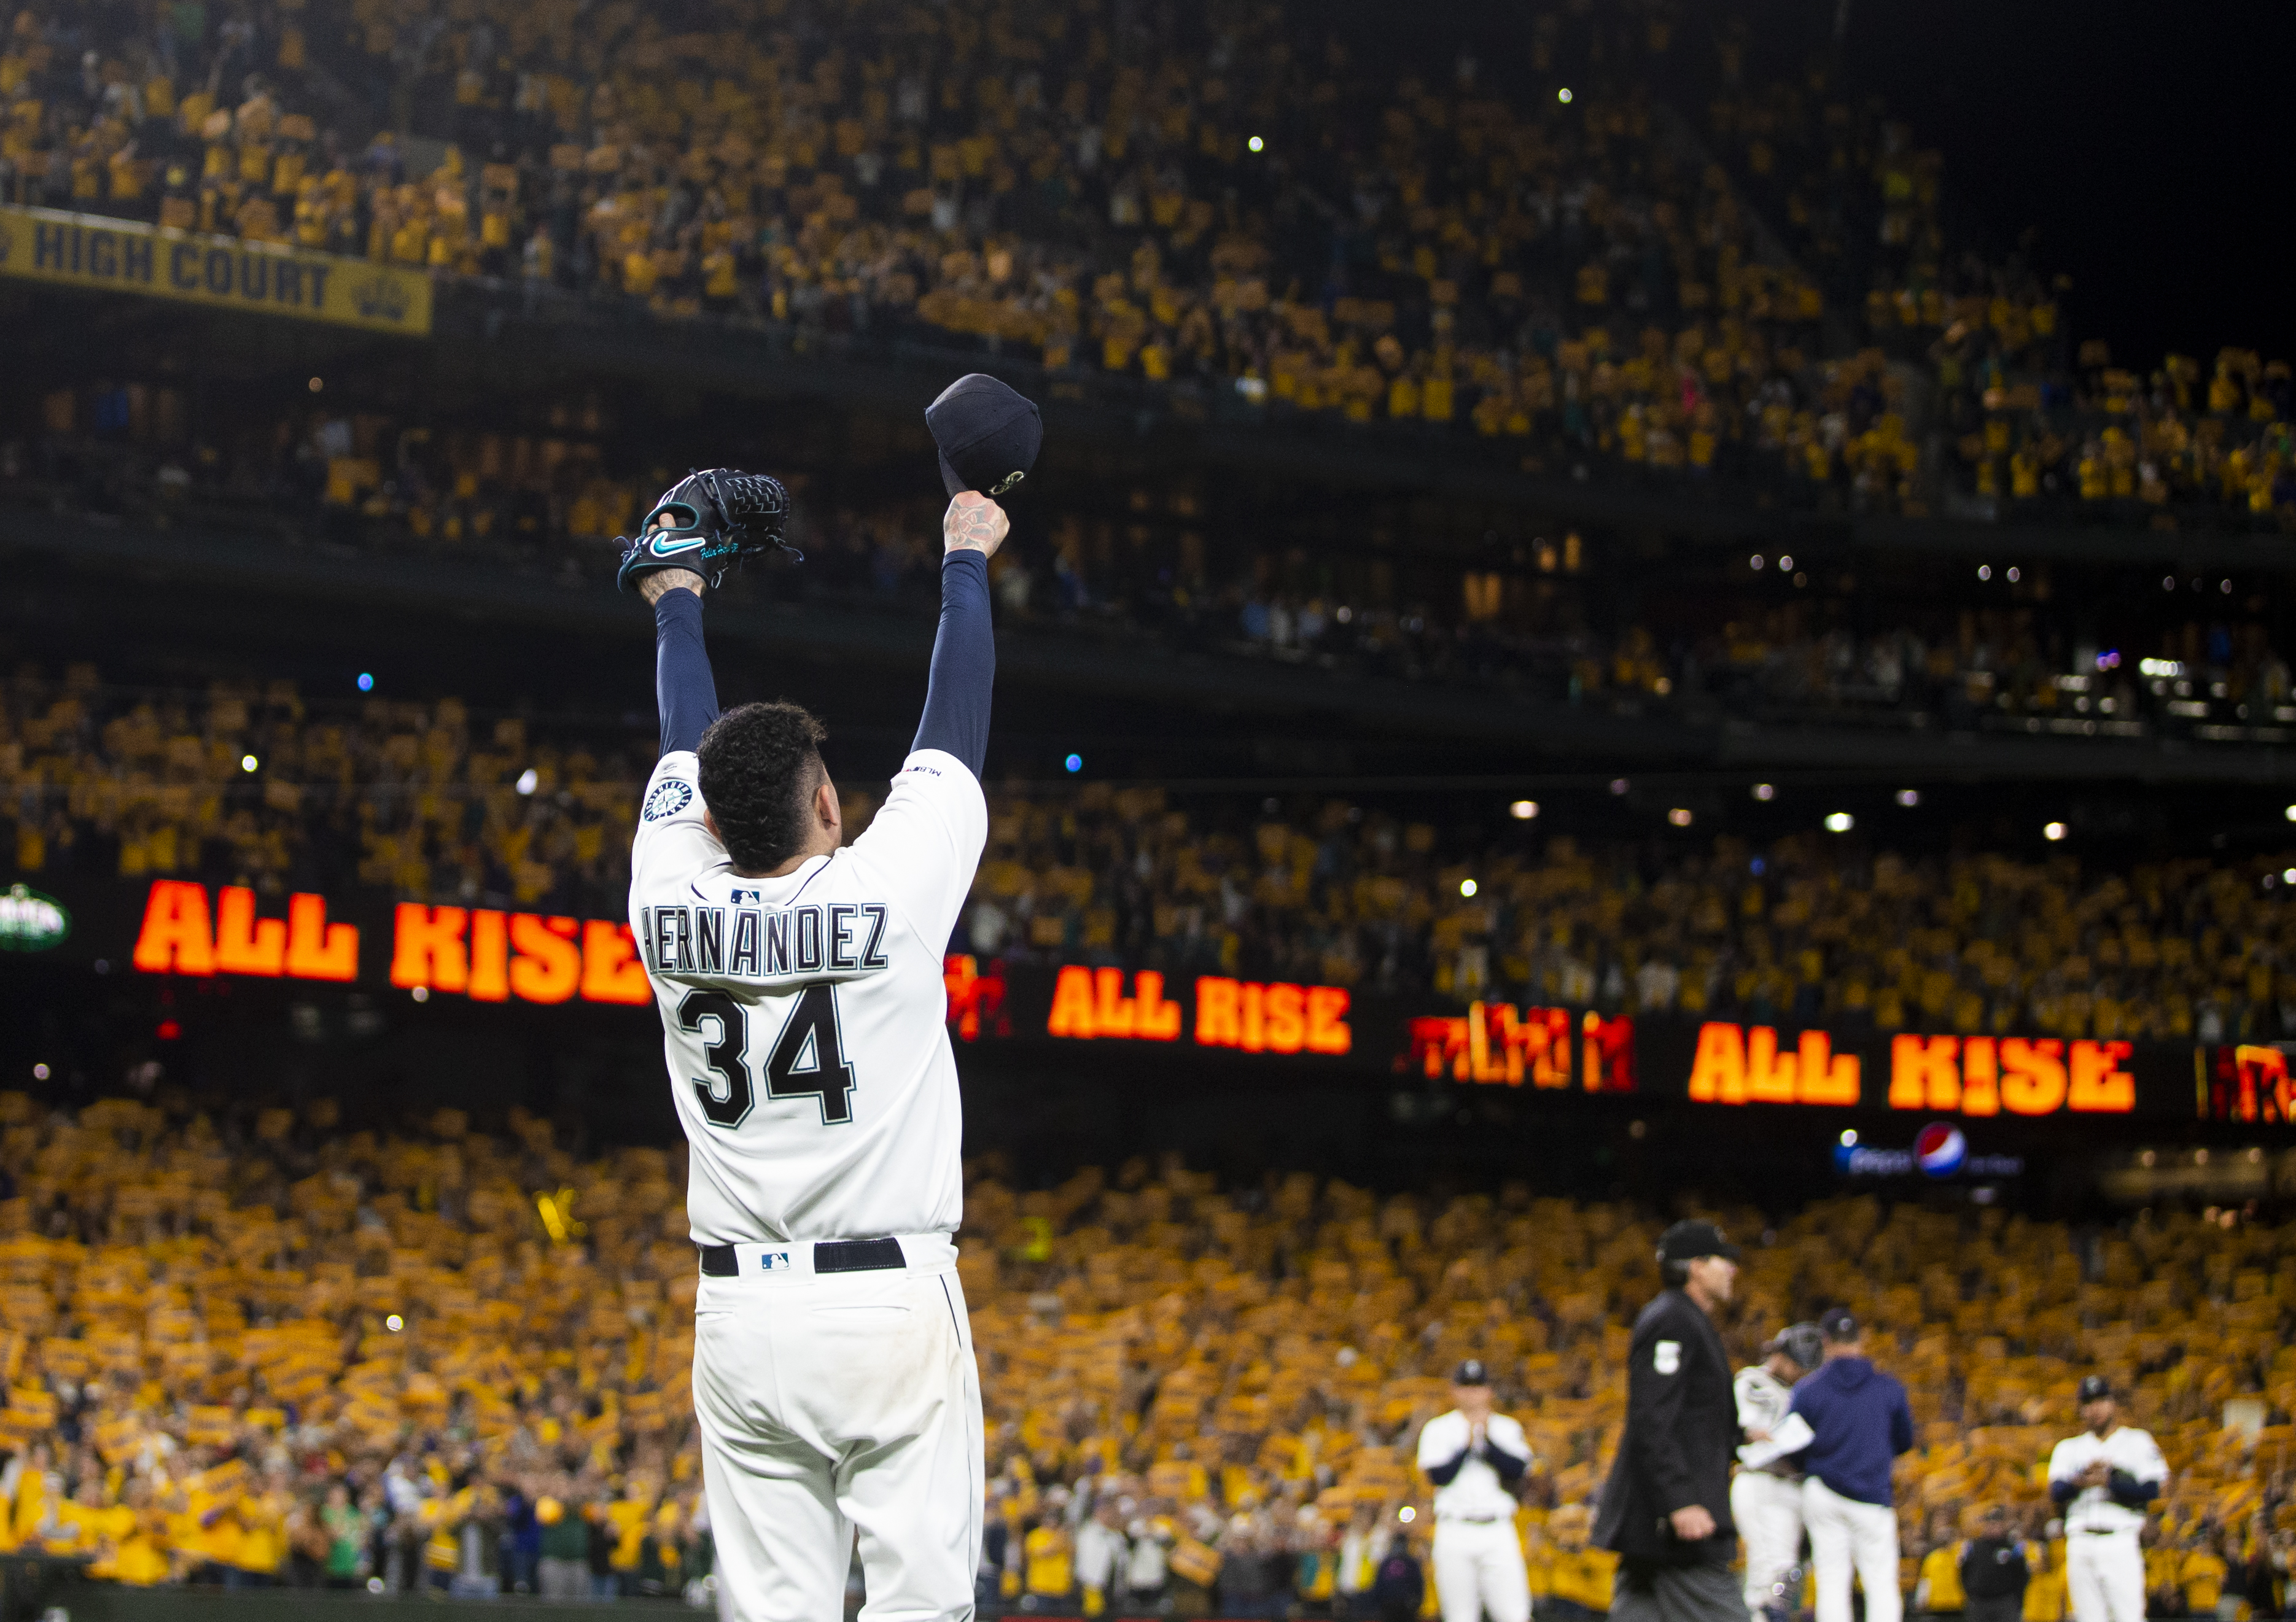 September 26, 2019: King Felix reigns for one last night with